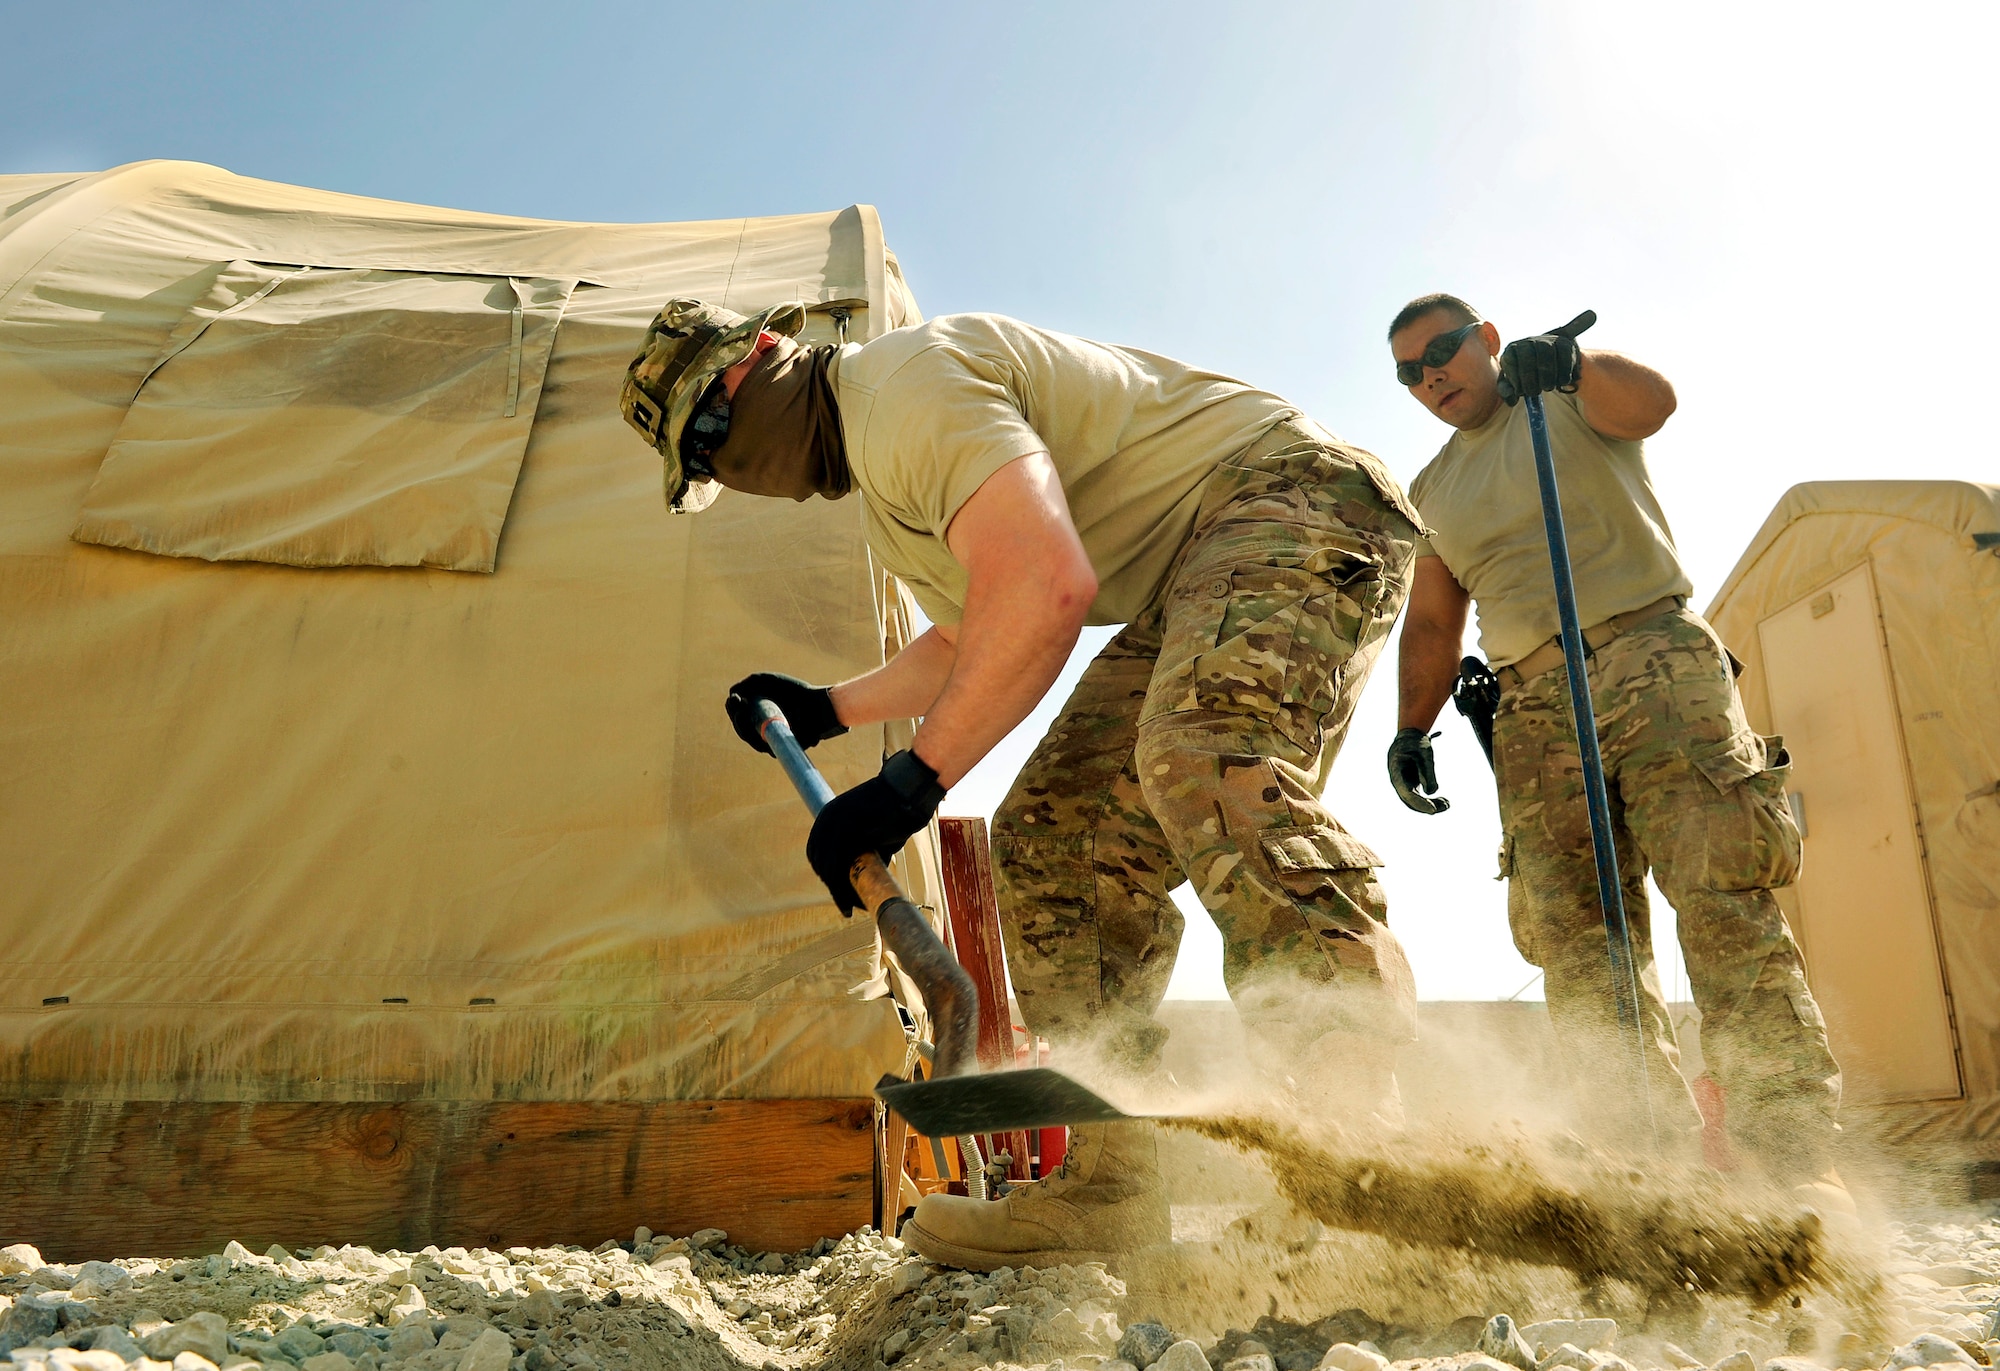 Capt. Wesley Parker, 455th Expeditionary Communications Squadron, operations flight commander, excavates trenches to hold conduit on Bagram Airfield, Afghanistan. The conduit will protect the fiber and copper cable running underground to the tents. He is deployed from Tinker Air Force Base, Okla., and is a native of Humble, Texas.